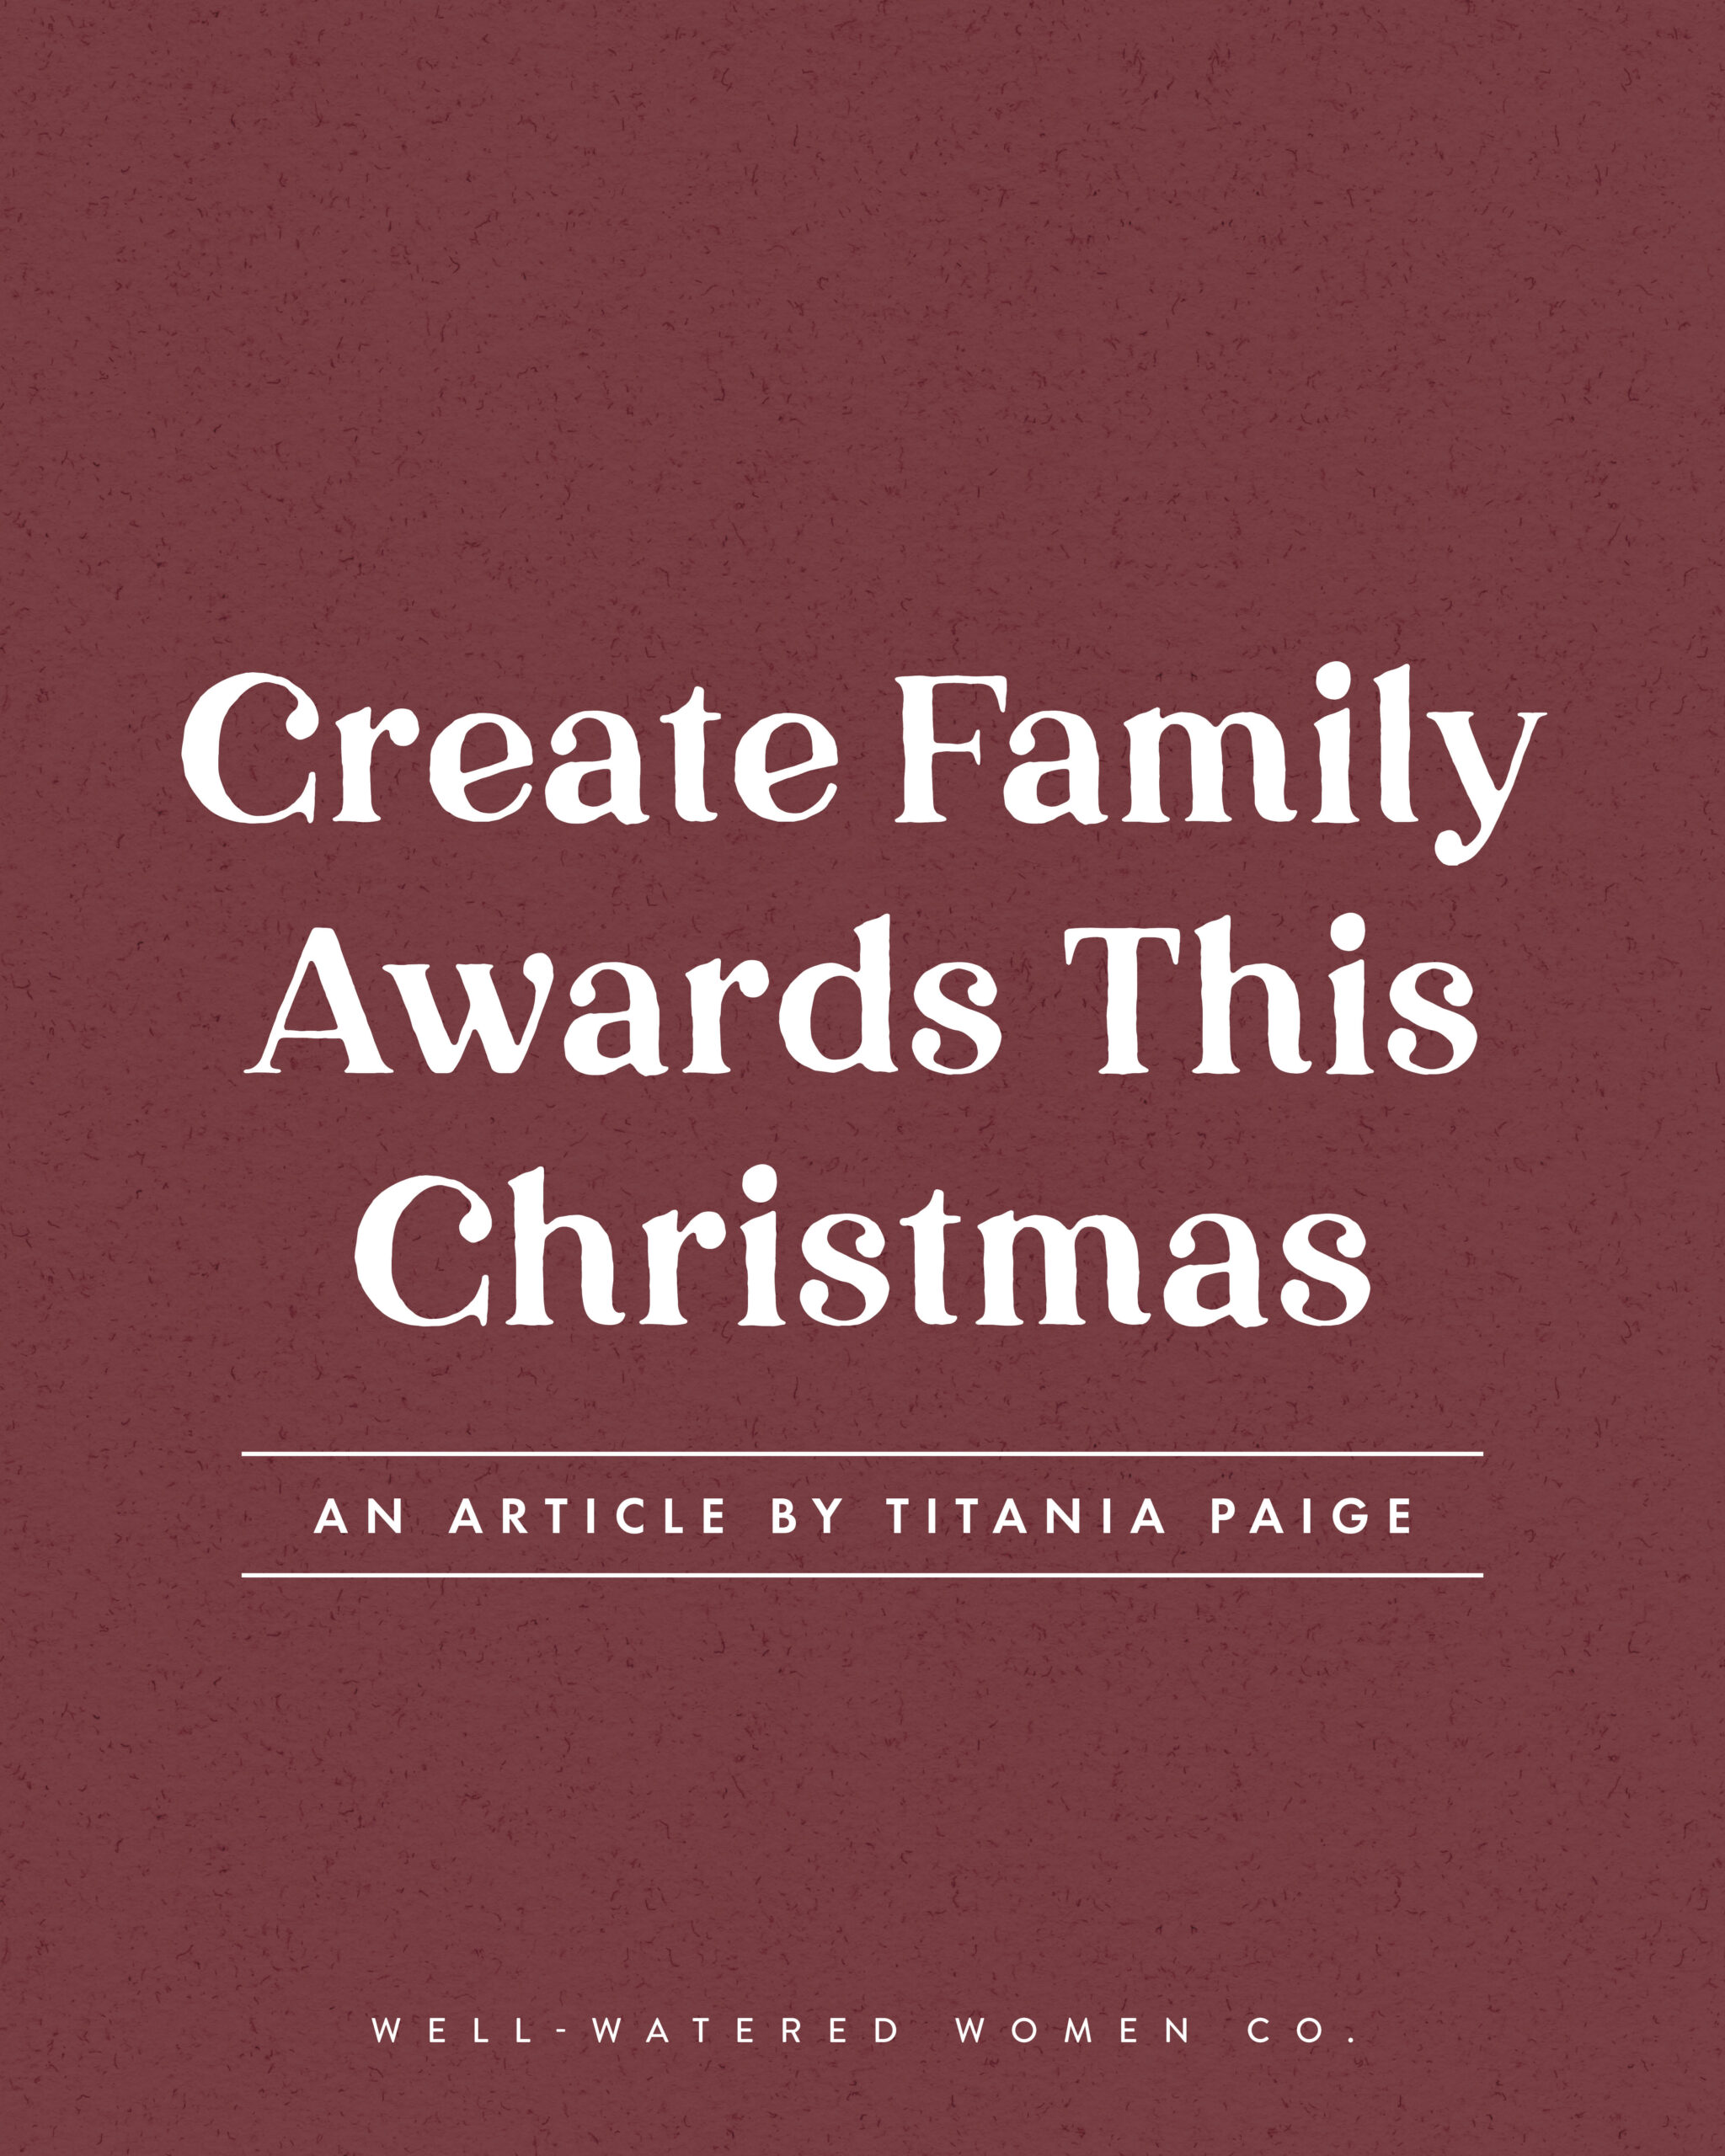 Create Family Awards This Christmas - an article from Well-Watered Women